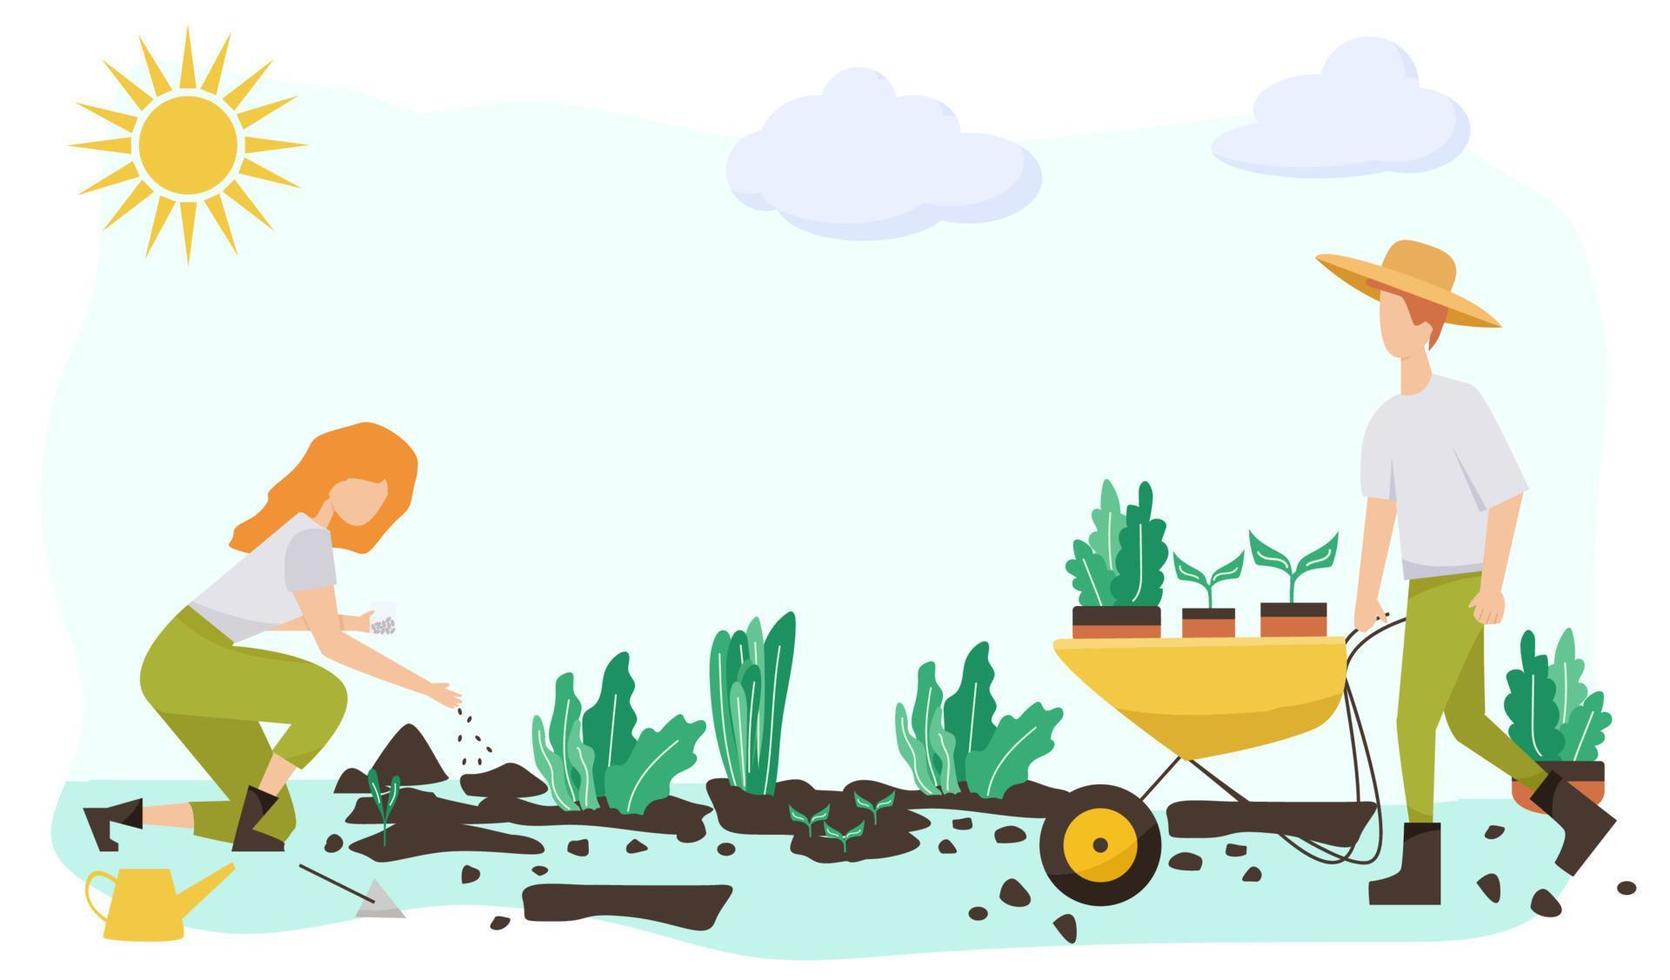 Gardening people set, spring.flat vector concept illustration of diverse people -men and women, doing hobby garden work.Spring gardening concept